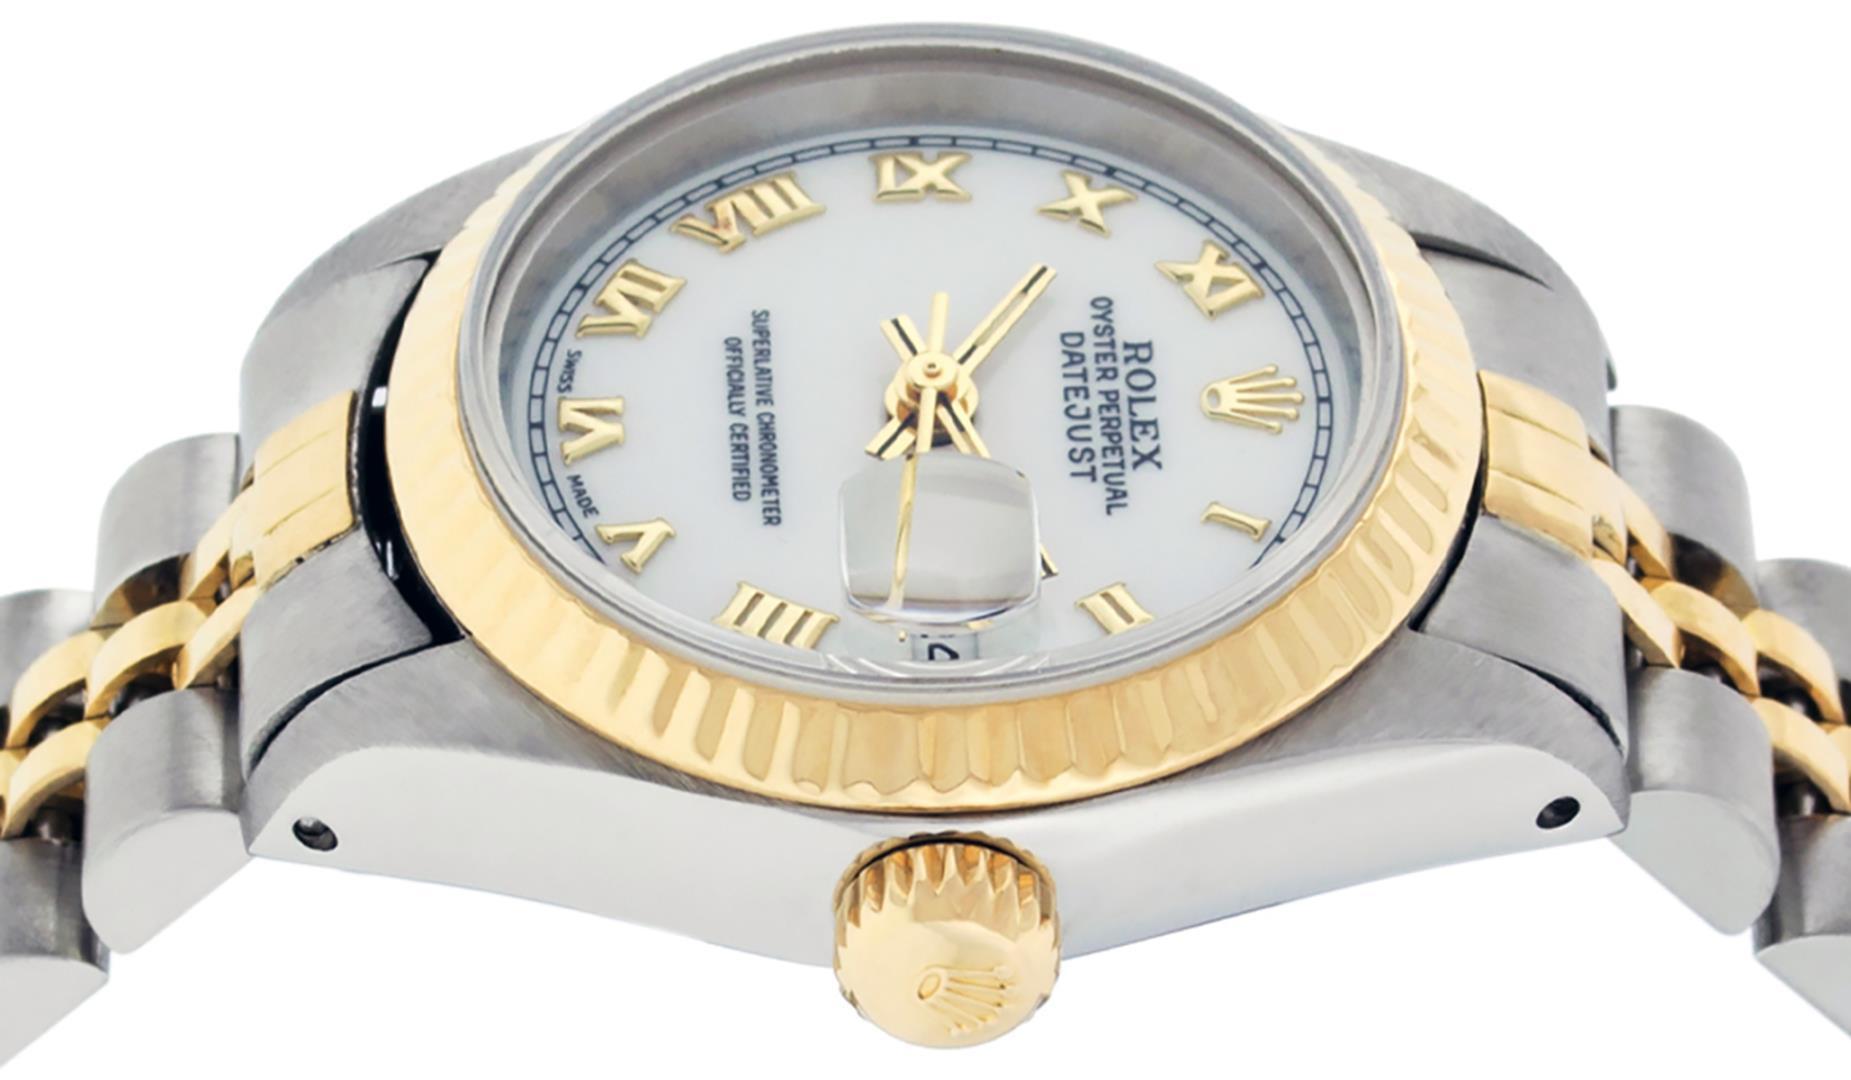 Rolex Ladies Two Tone White Roman Oyster Perpetual Datejust Wristwatch